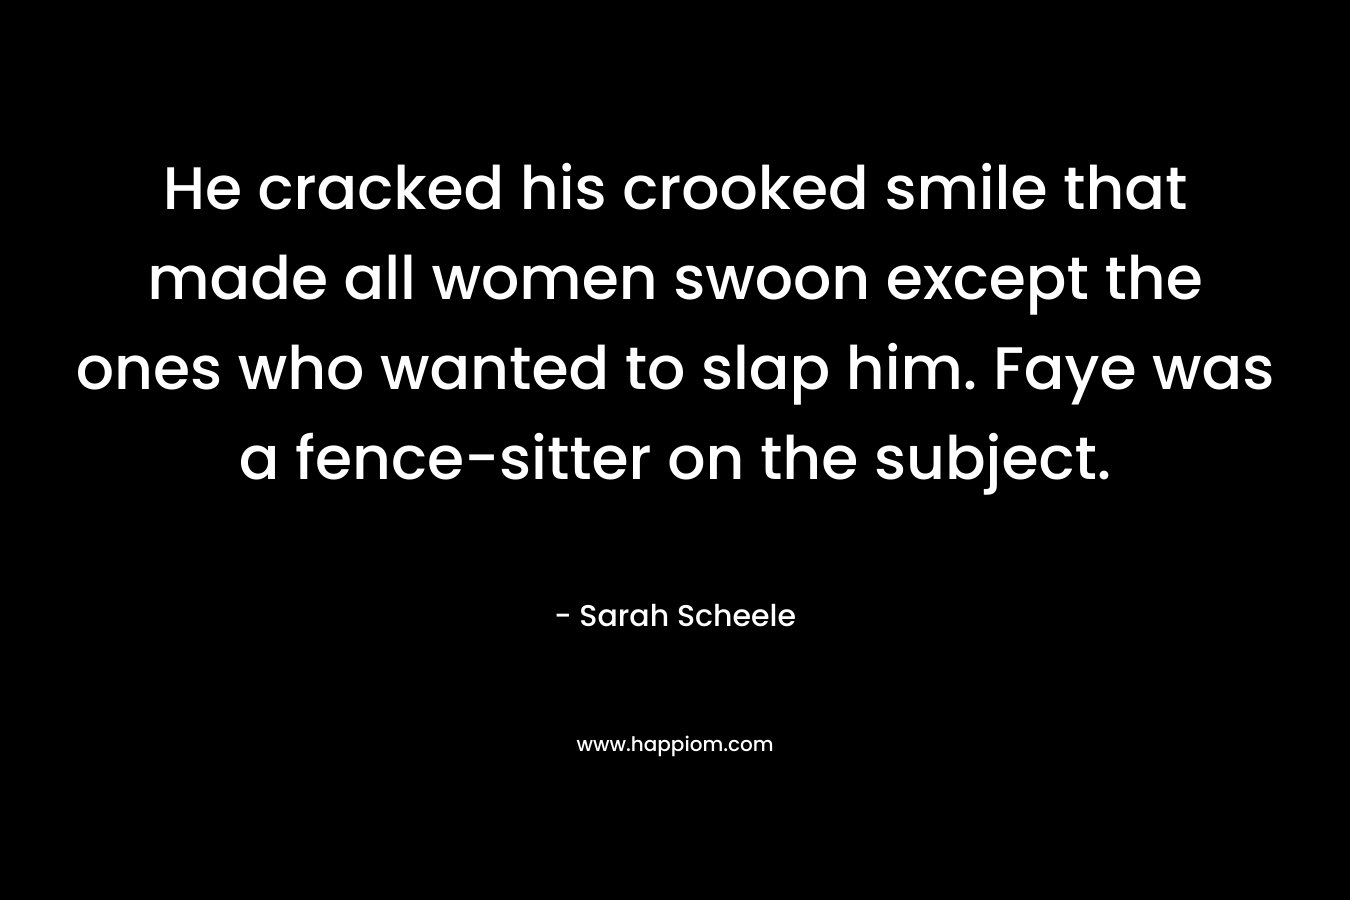 He cracked his crooked smile that made all women swoon except the ones who wanted to slap him. Faye was a fence-sitter on the subject. – Sarah Scheele